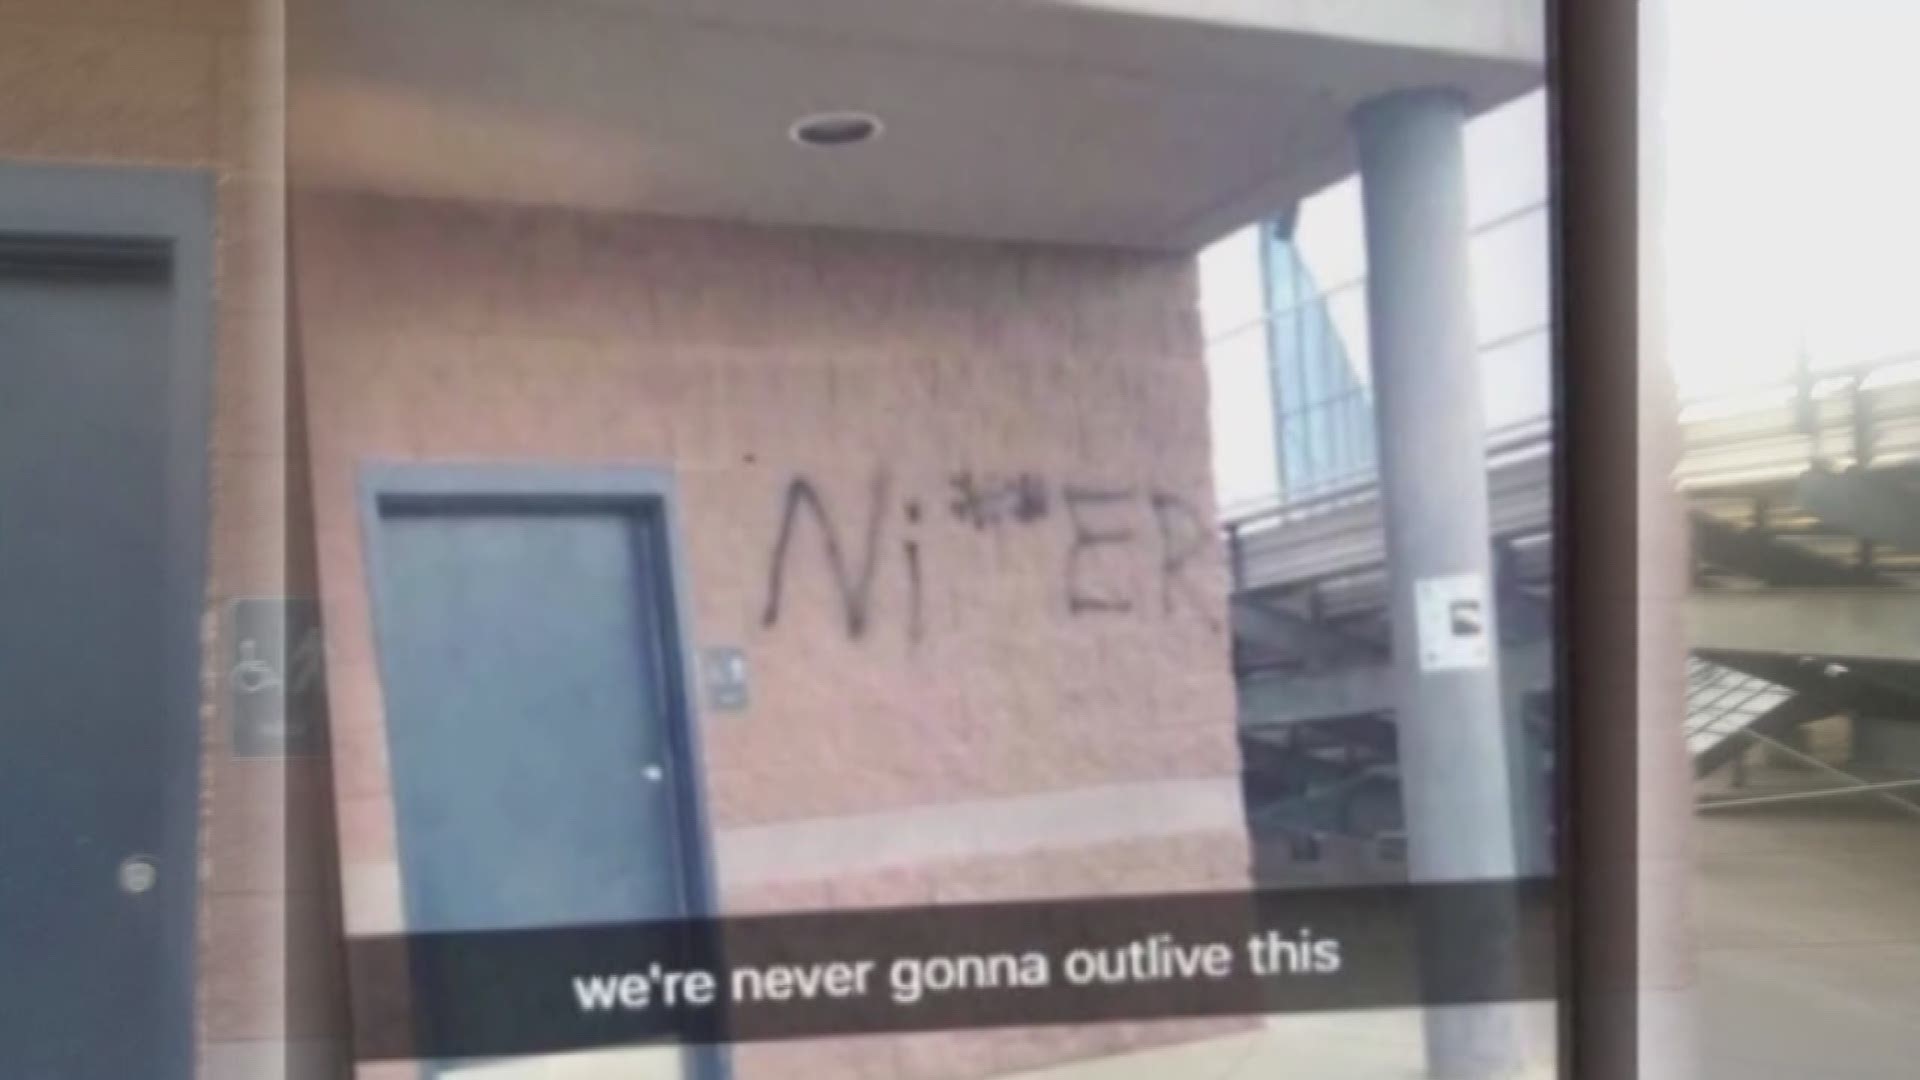 Desert Vista High School is again in the news for a racial slur, this time in the form of graffiti.